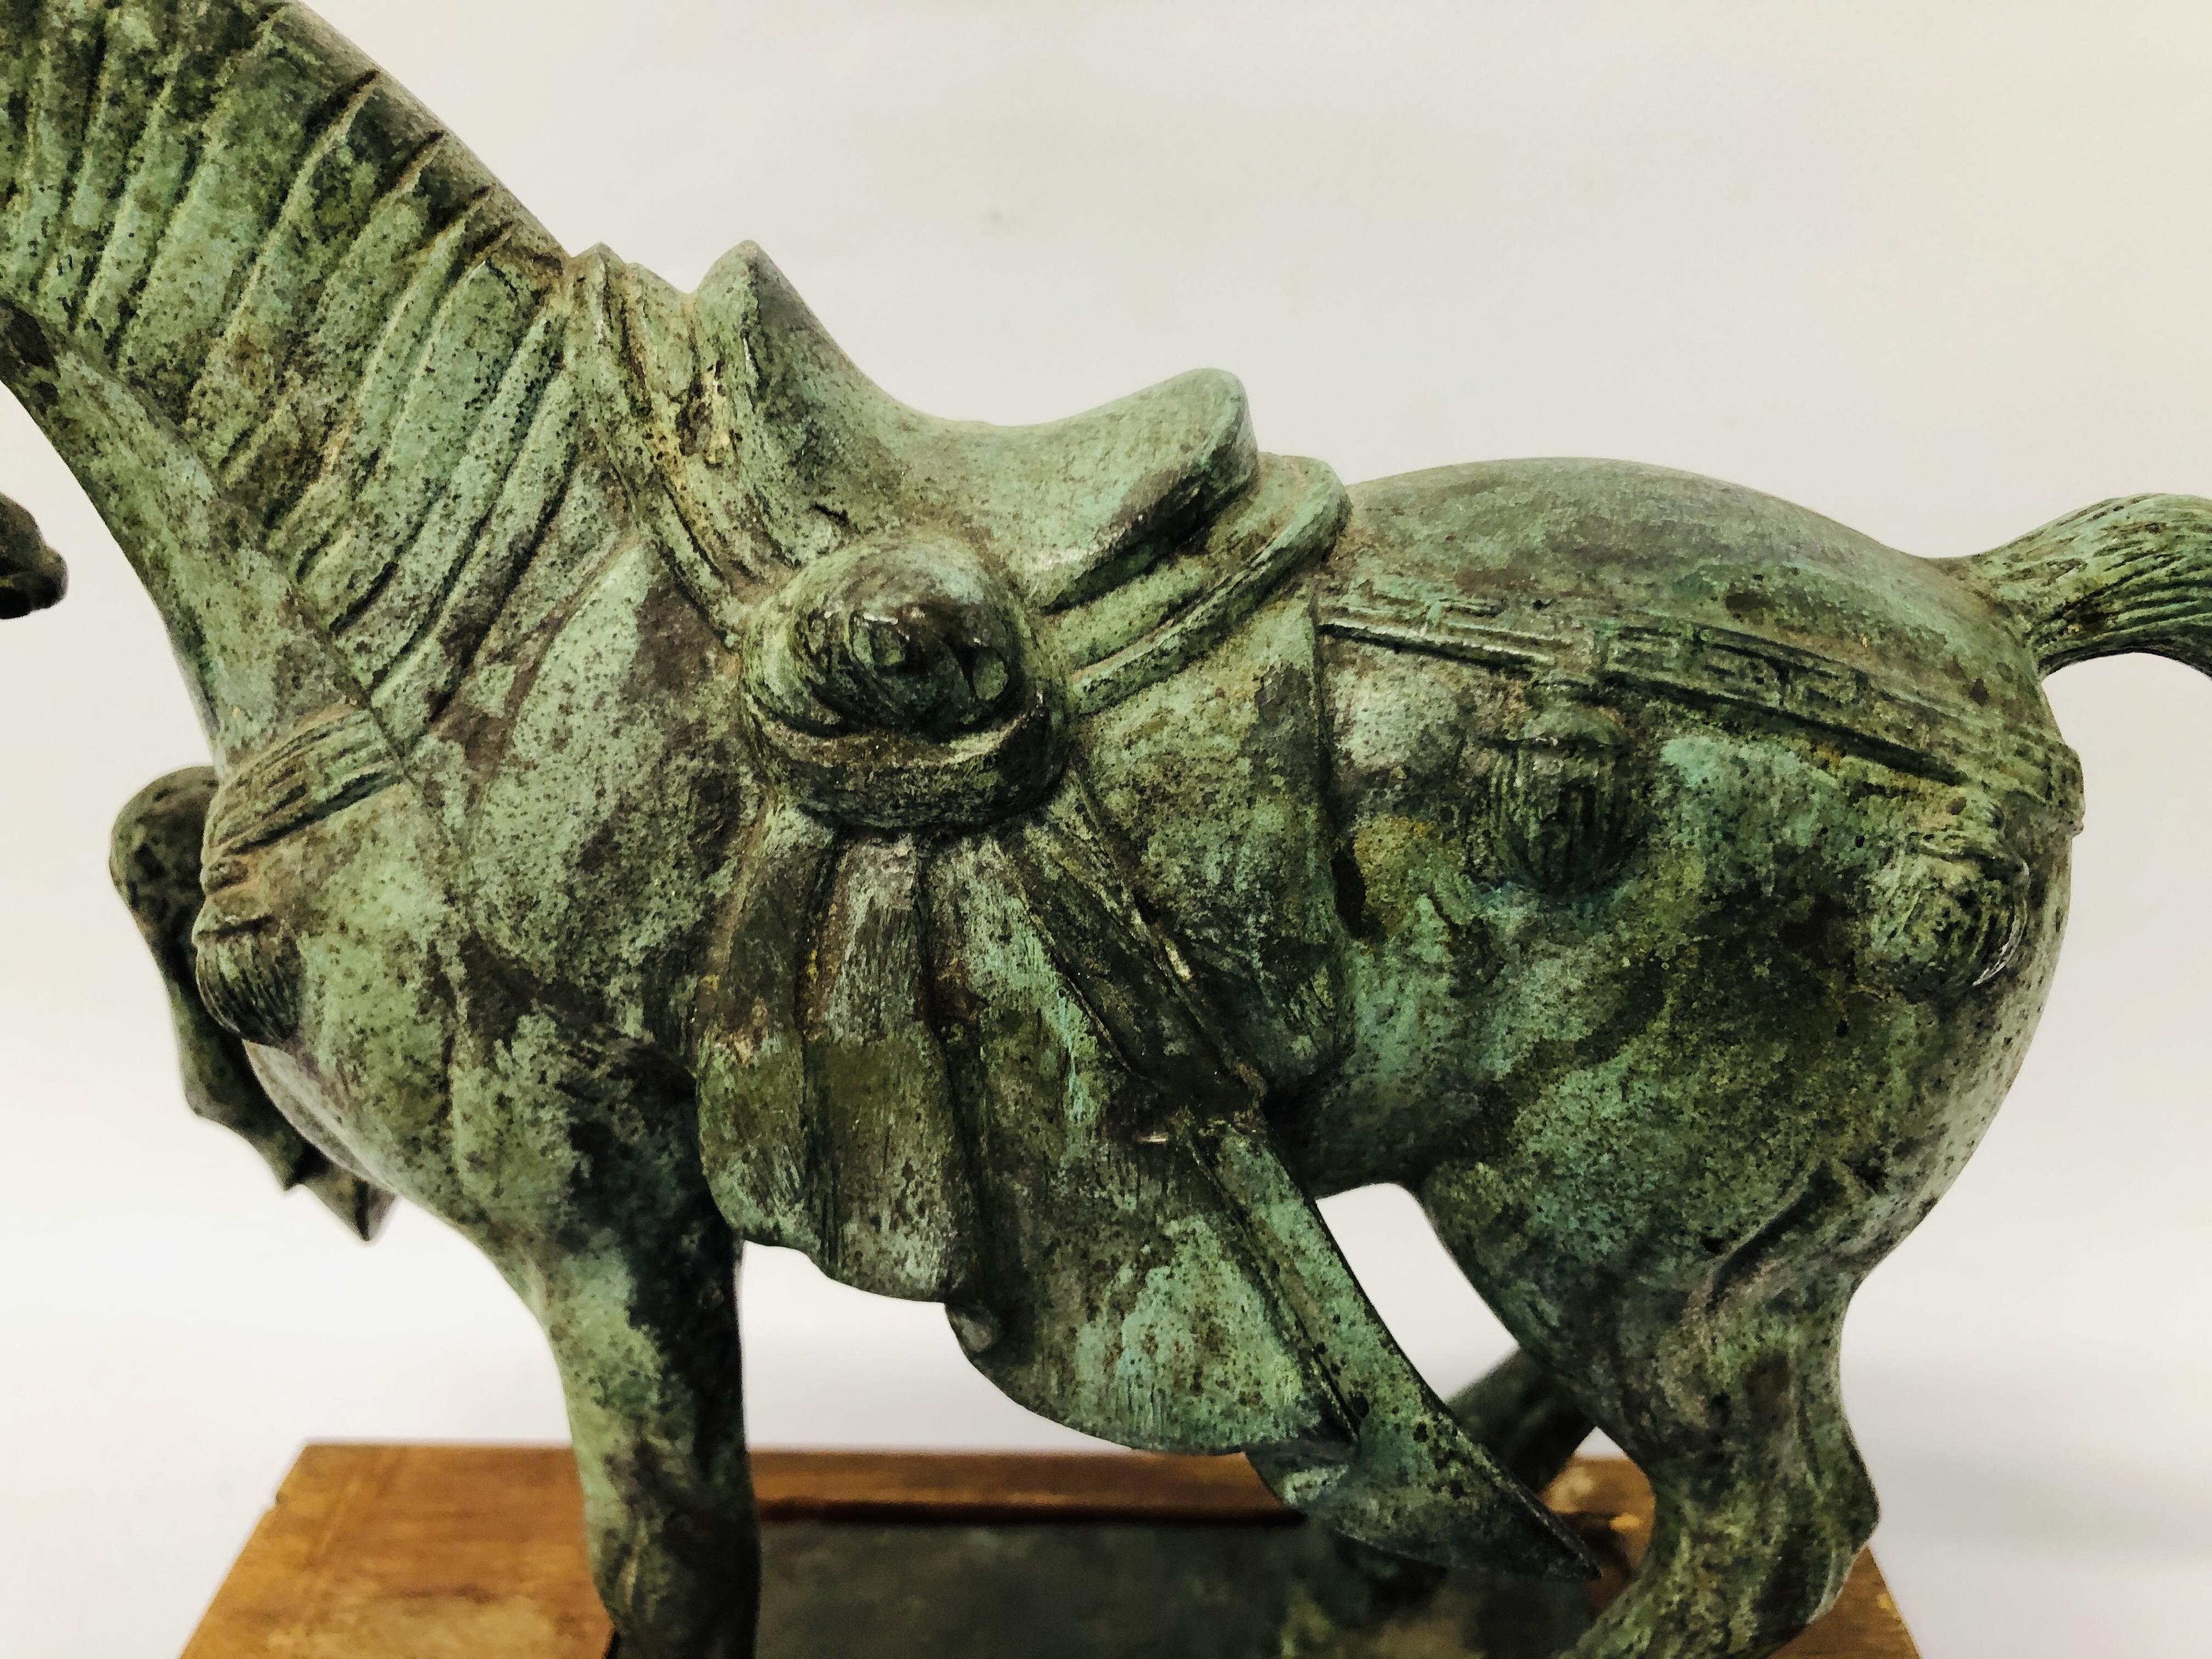 REPRODUCTION CAST TANG STYLE HORSE ON DISPLAY BASE - Image 4 of 8